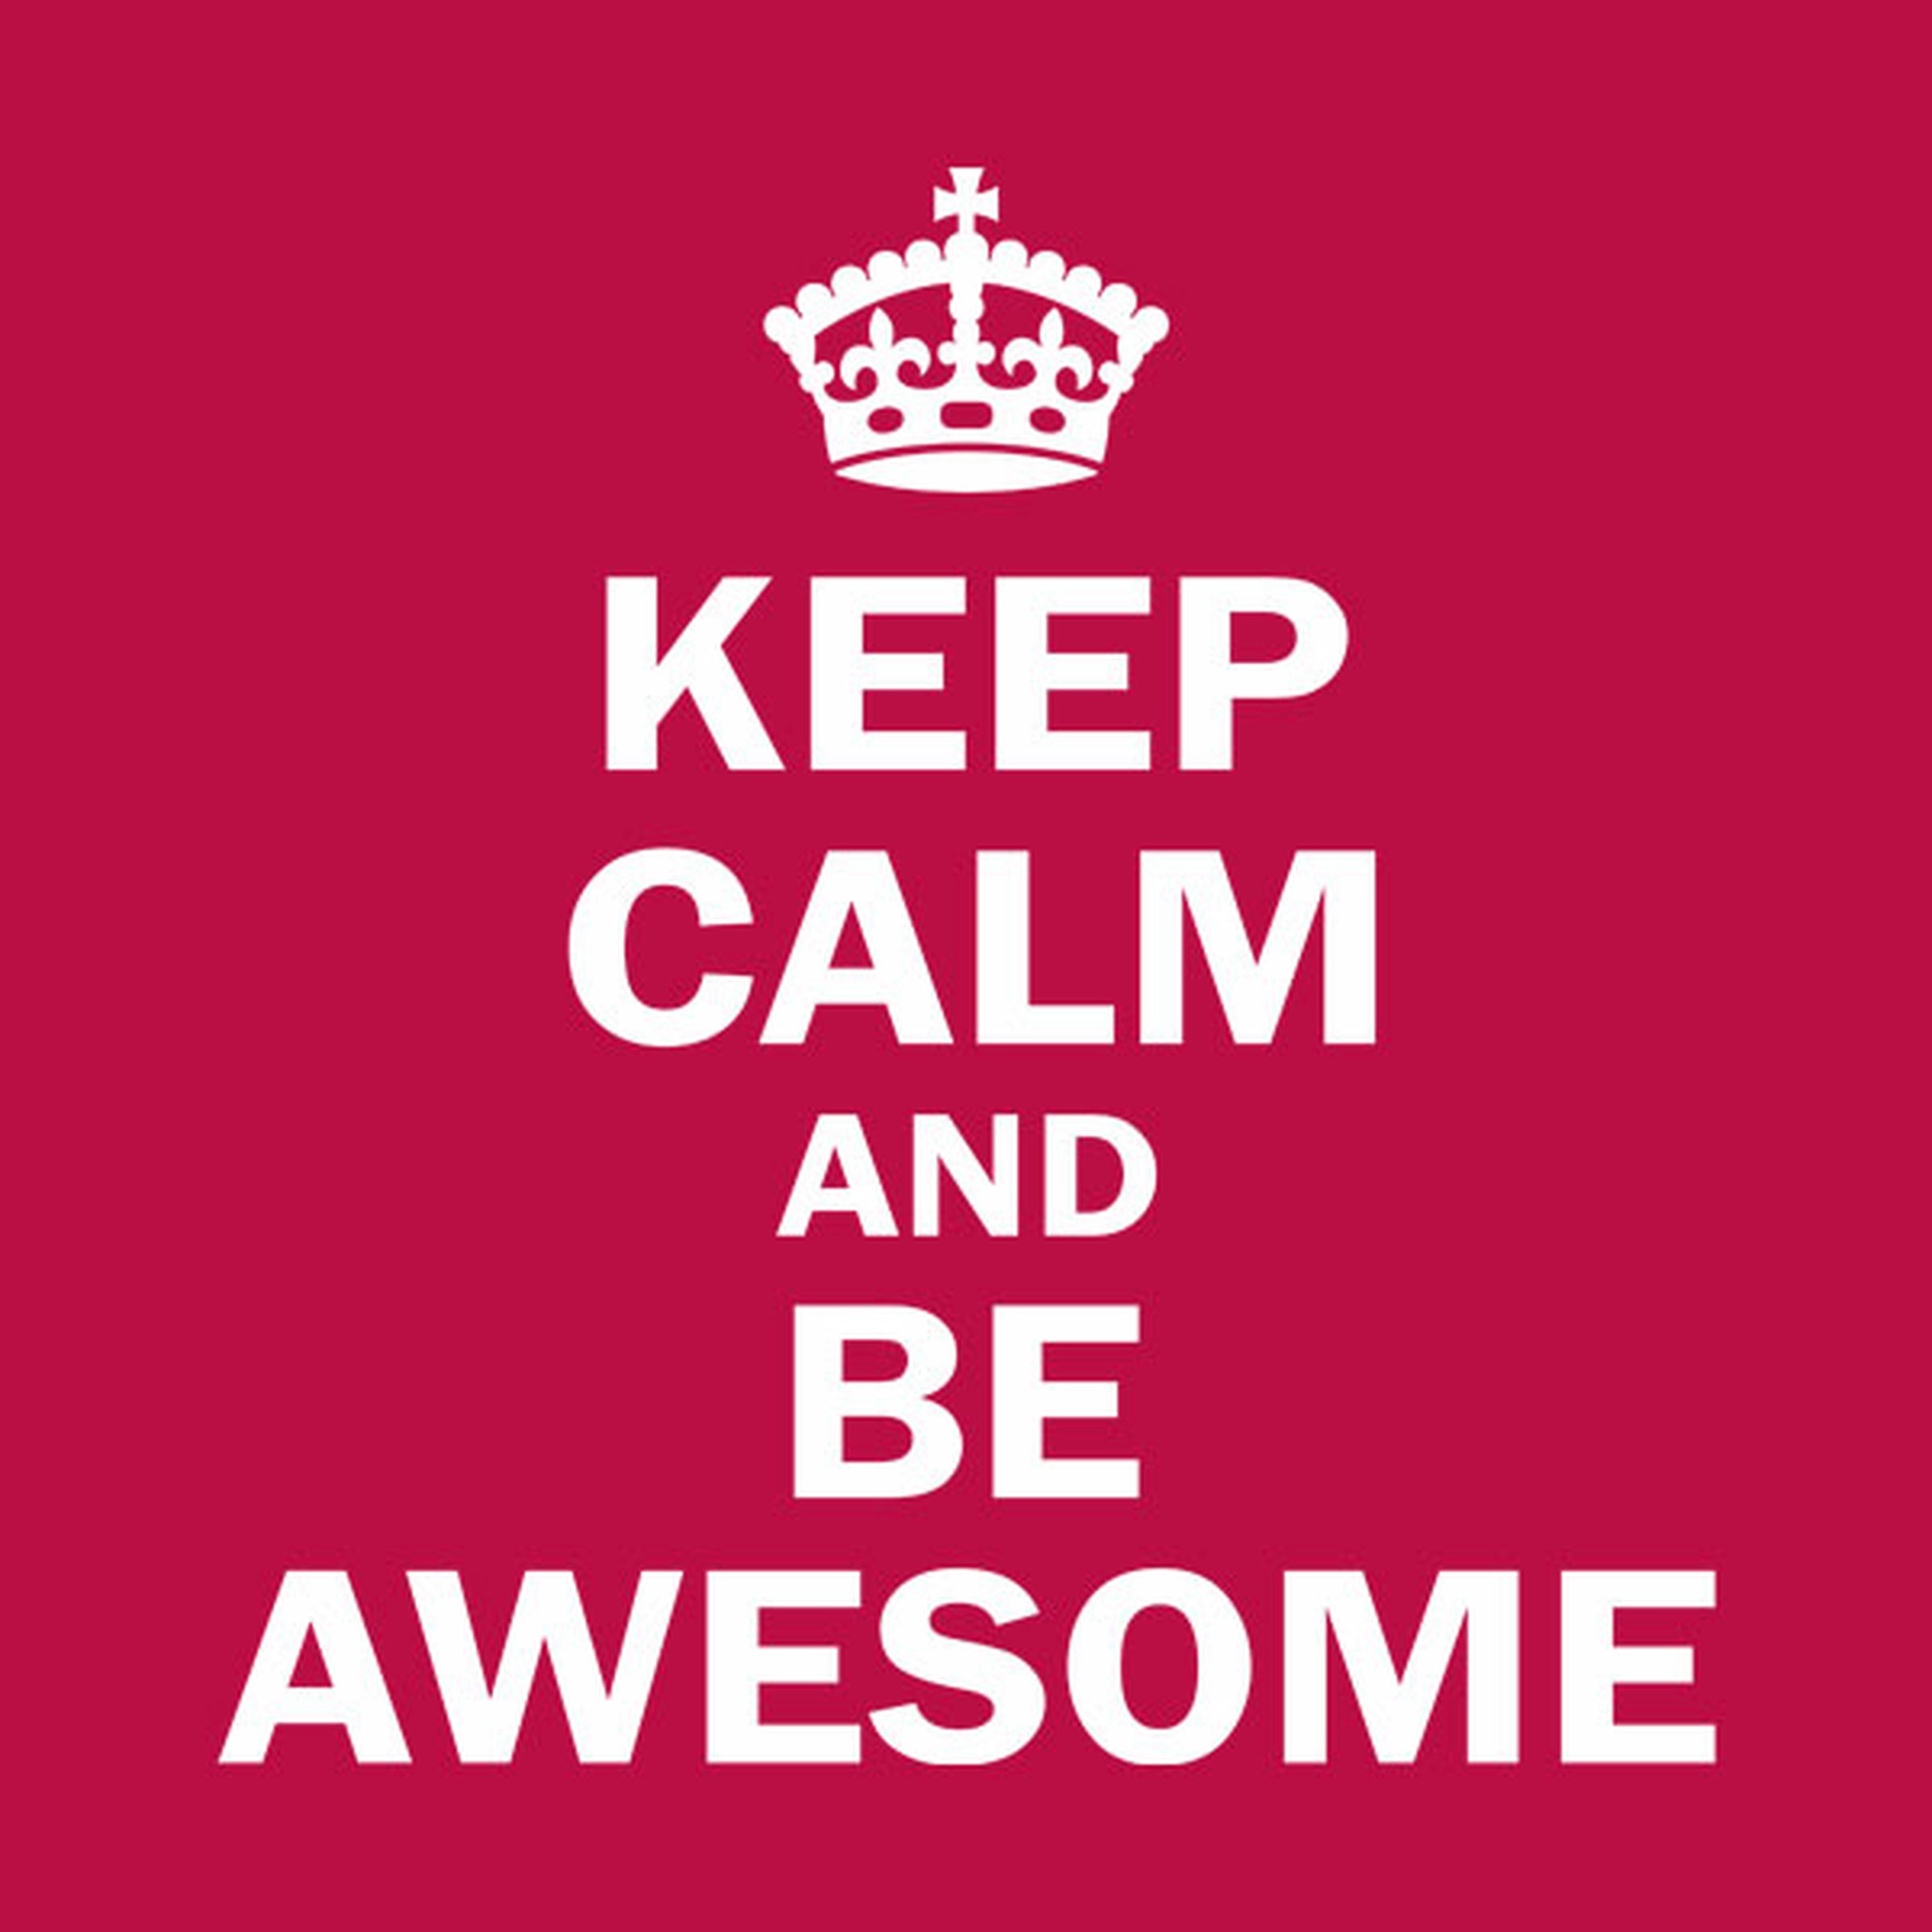 Keep calm and be awesome - T-shirt